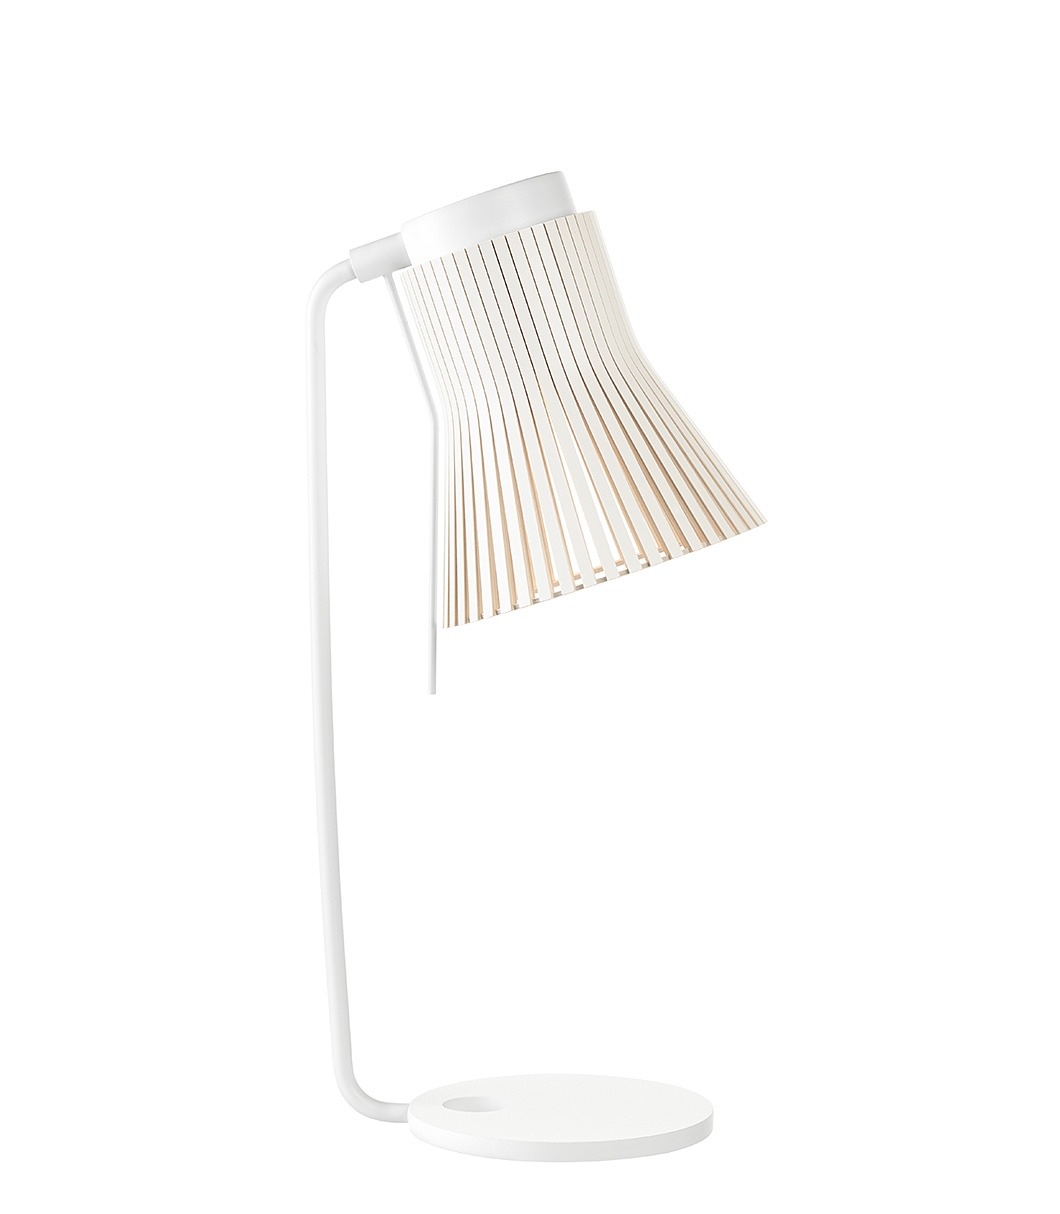 Petite 4620 table lamp is available in white laminated